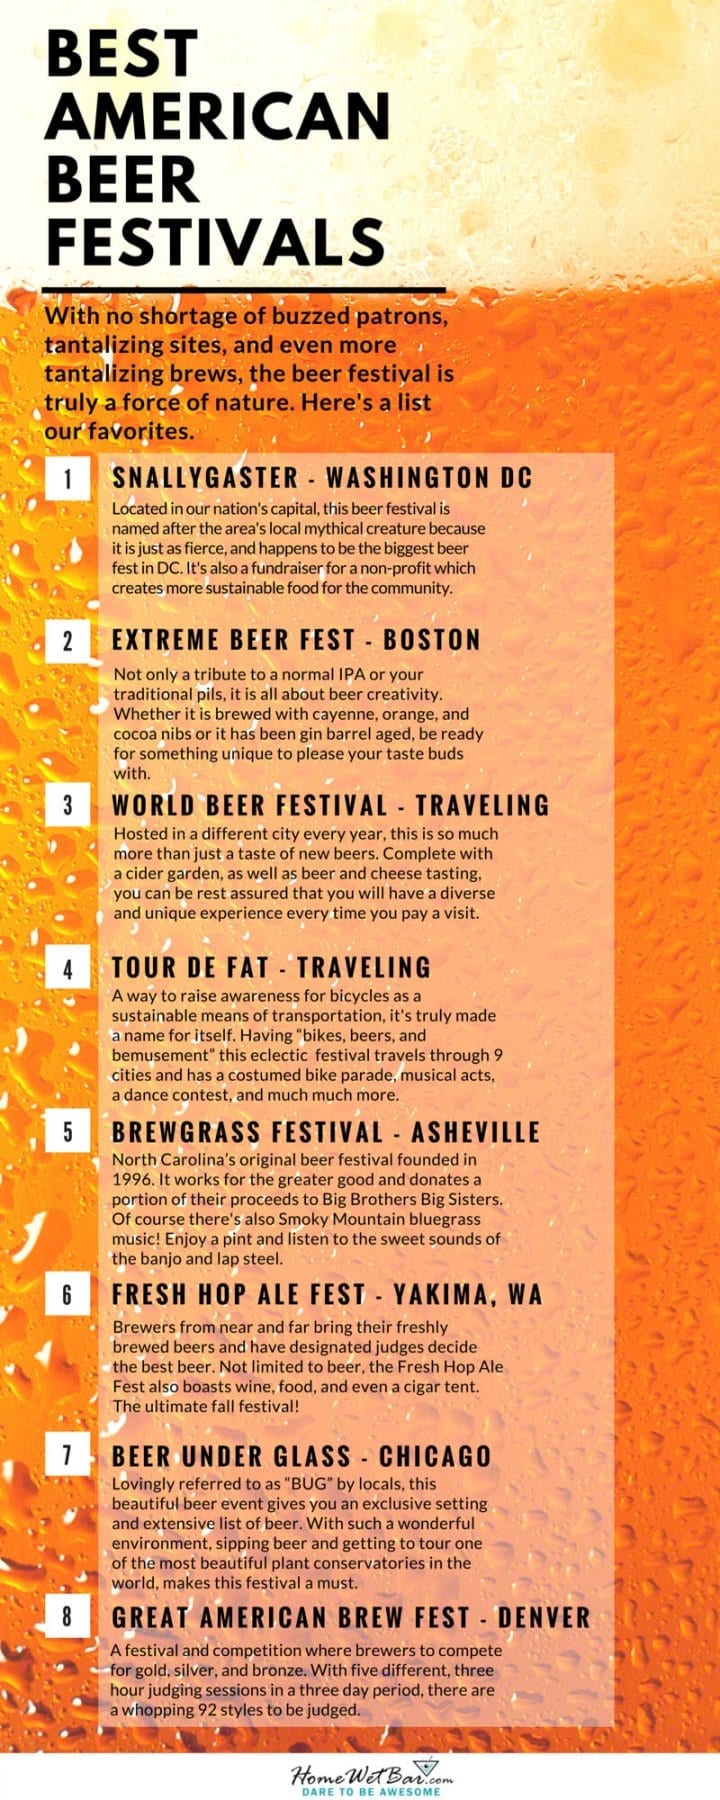 The Best American Beer Festivals and Why We Love Them